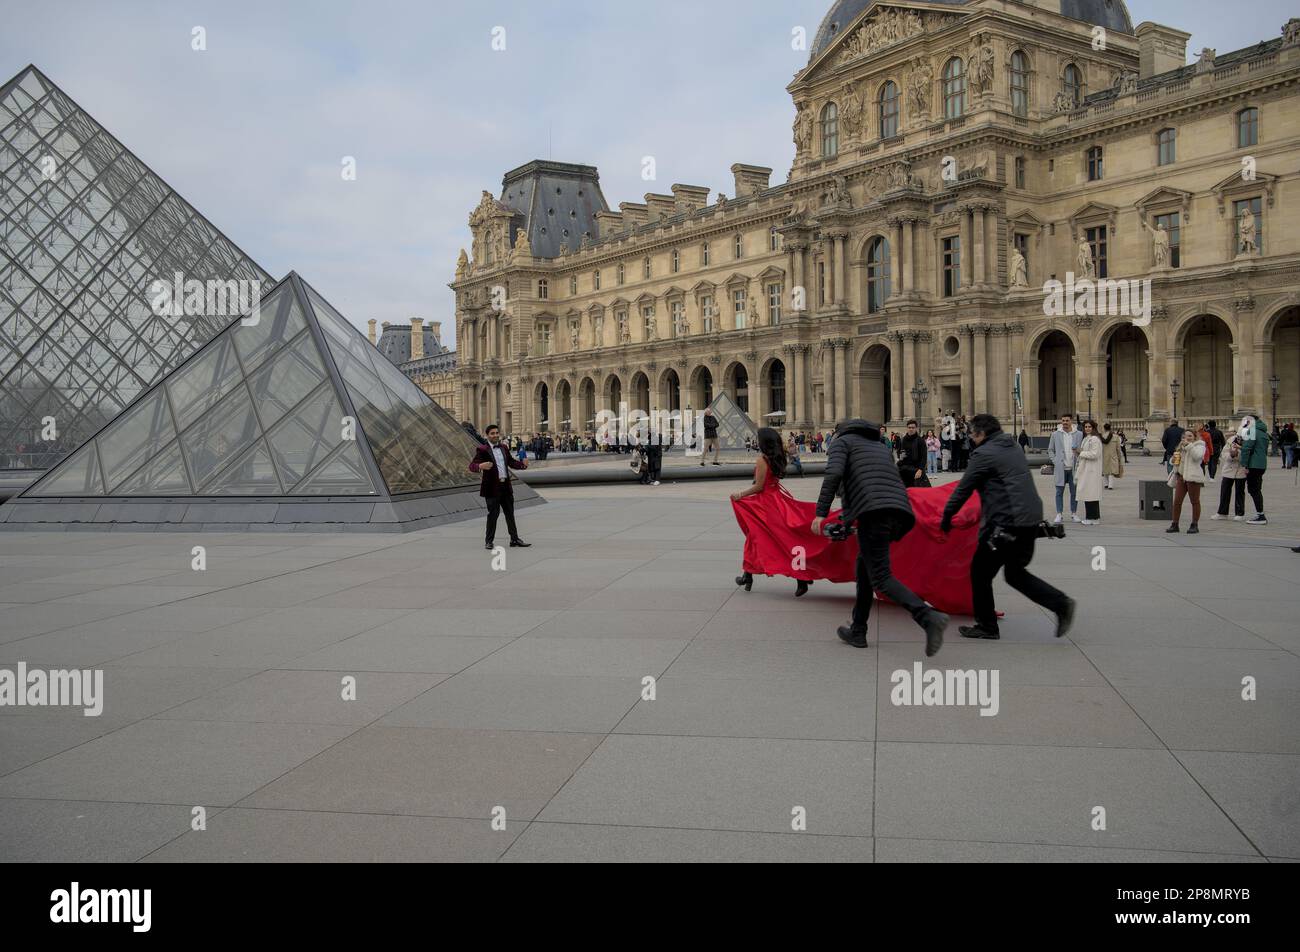 Woman in red dress running with a camera crew towards his partner in the Louvre during winter. Paris, France Stock Photo